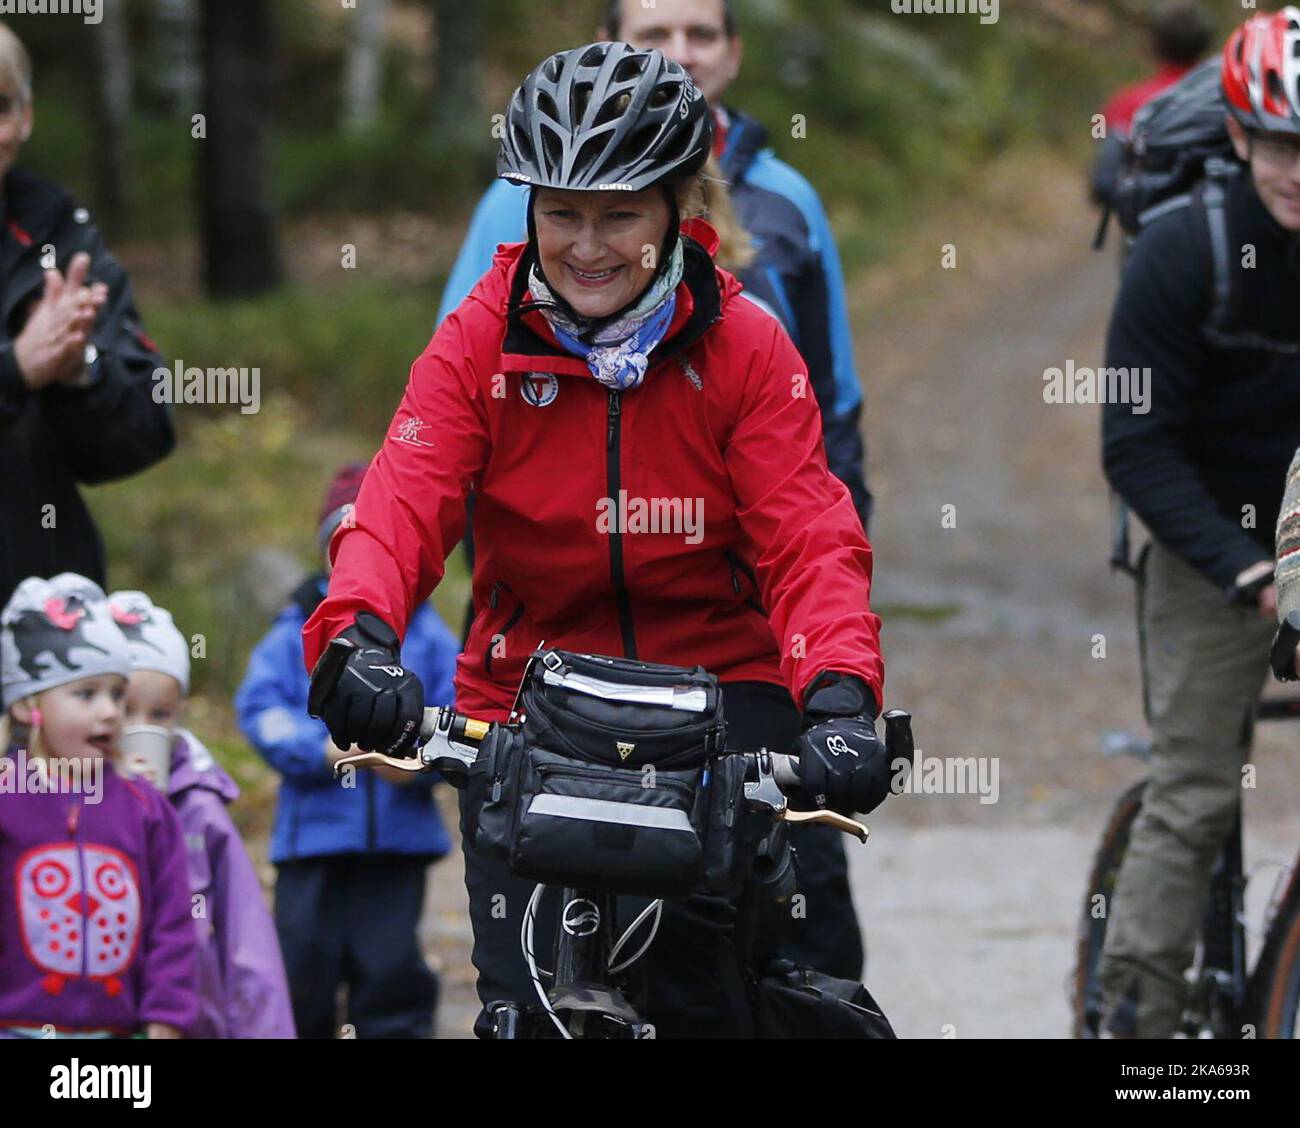 Oslo 20141025. Queen Sonja of Norway attends a ceremony in the woods sourrounding Oslo, where she unveils Oslo's geographic center, marked by a monument by the artist Jon Gundersen. The sporty Queen got there by using her bike. Mayor of Oslo, Fabian Stang, was the the QueenÂ´s host. Photo: Lise Aserud / NTB scanpix  Stock Photo